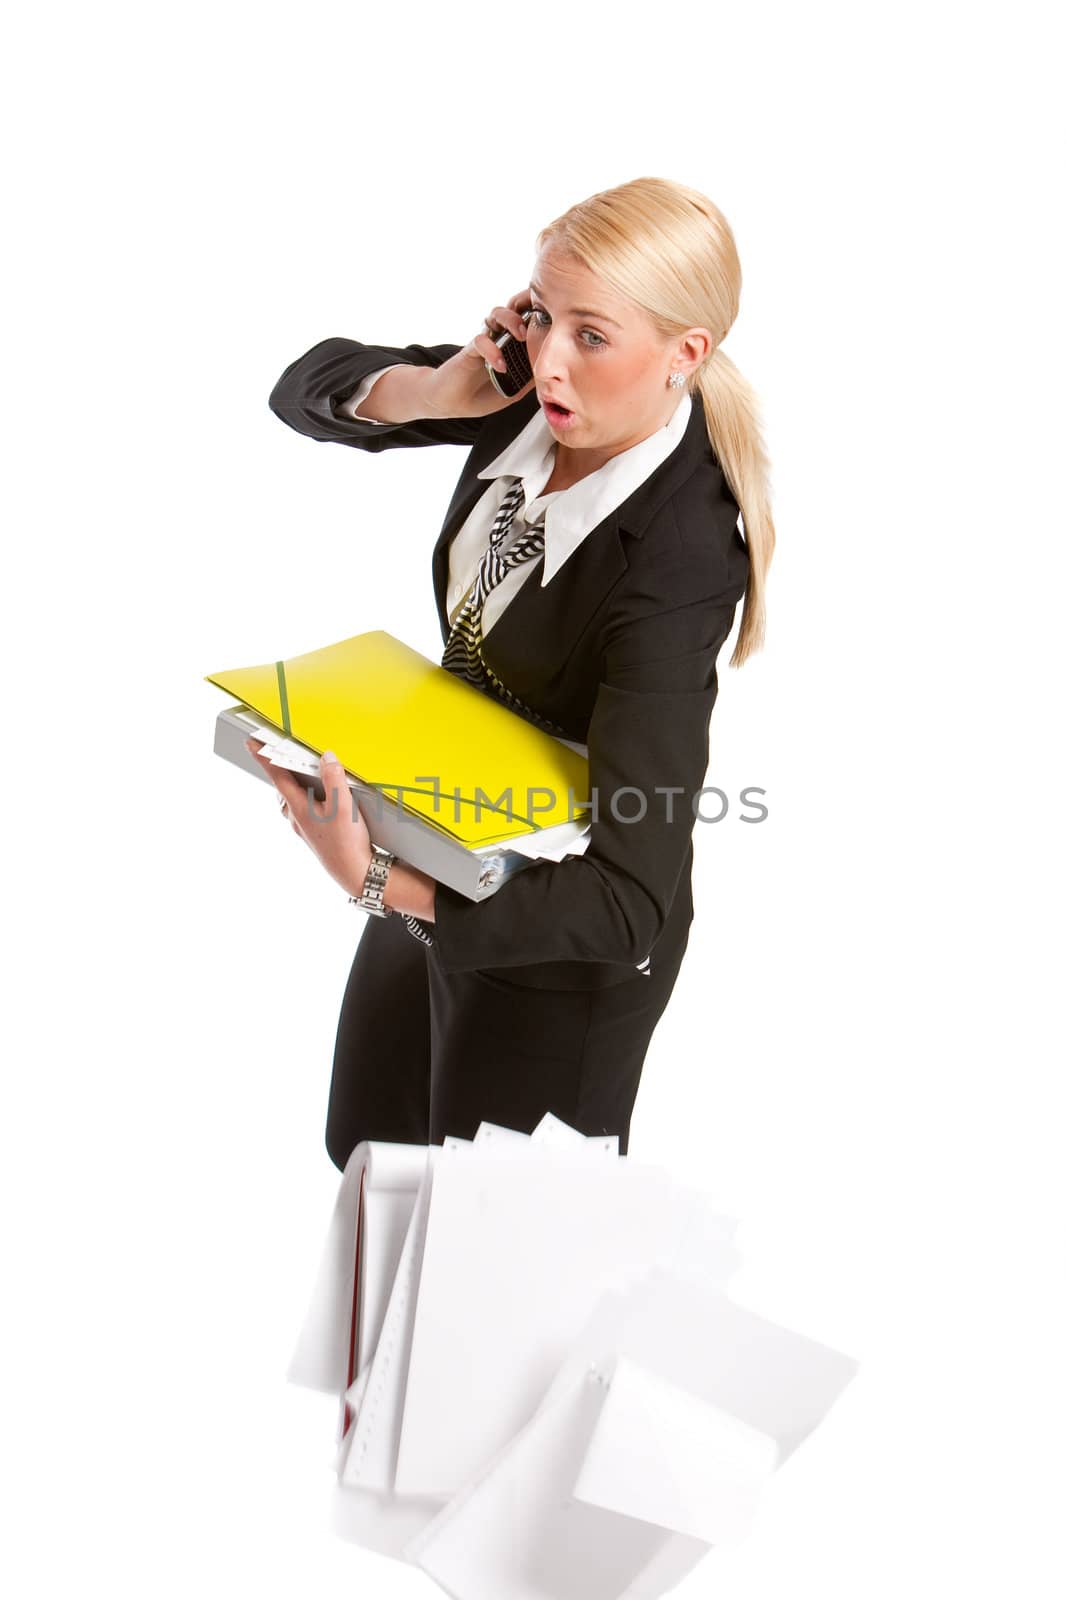 Businesswoman dropping all her papers by Fotosmurf